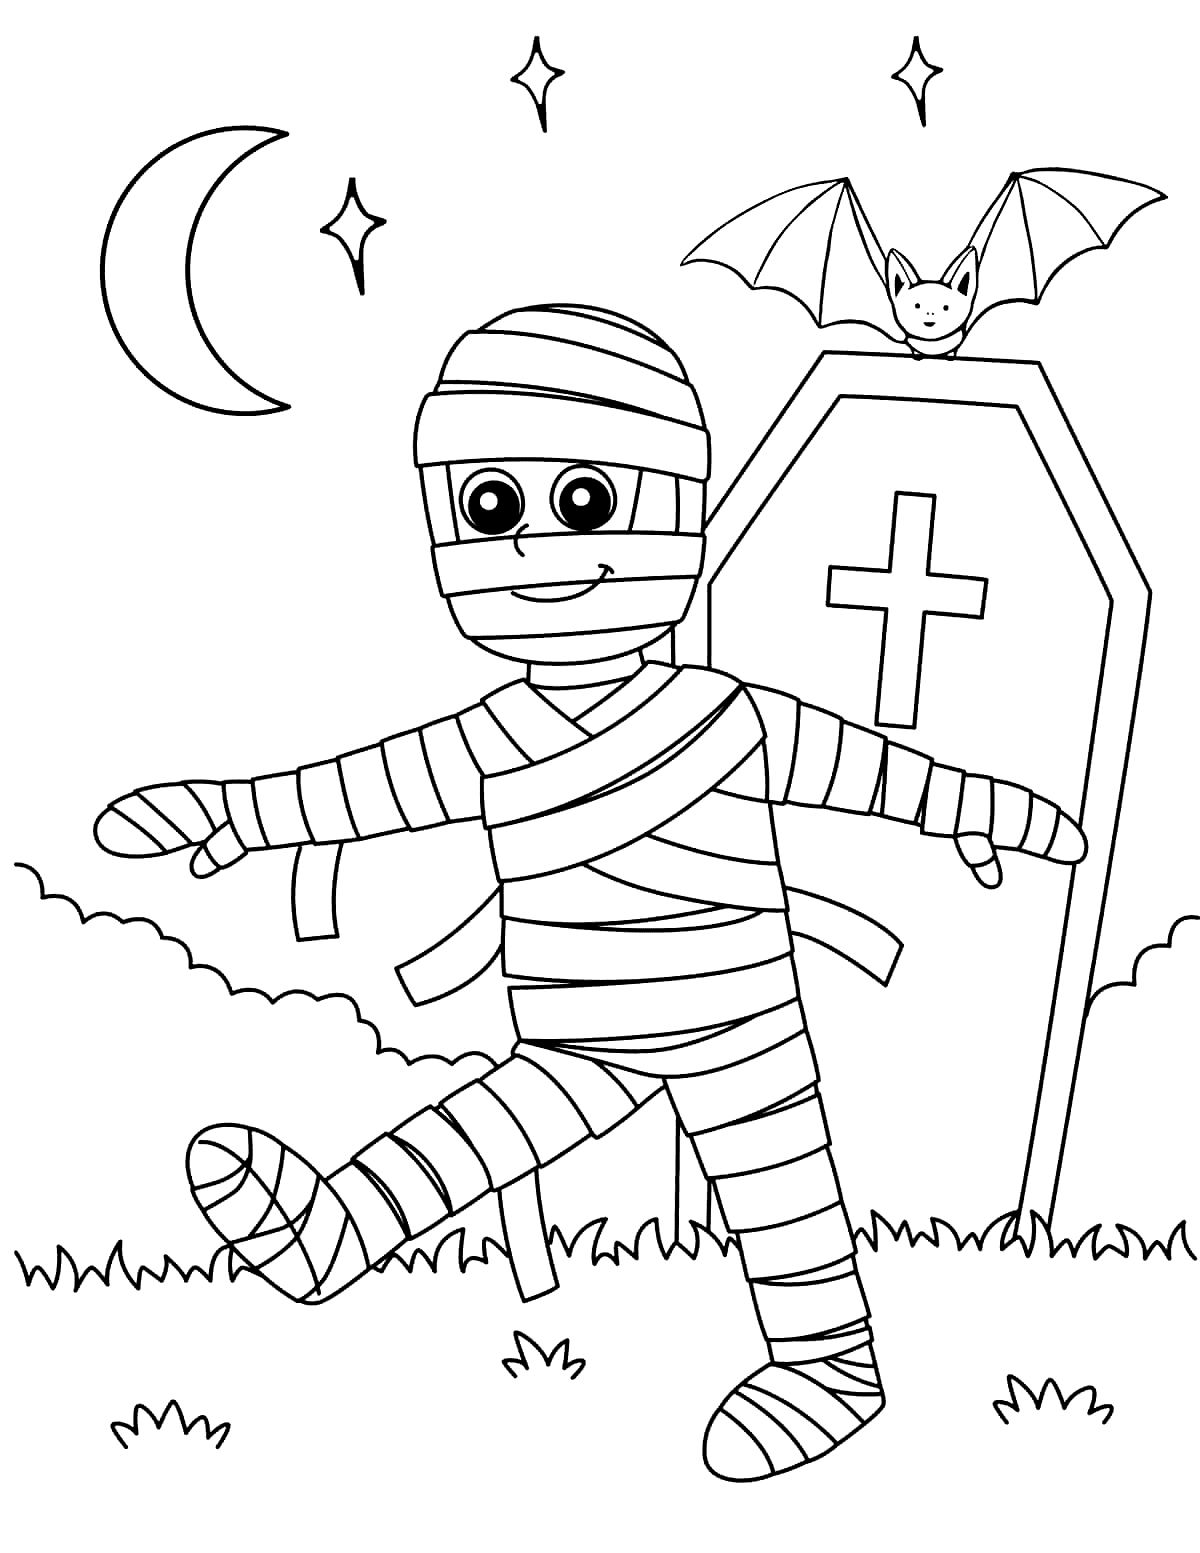 Hallowen Funny Coloring Page